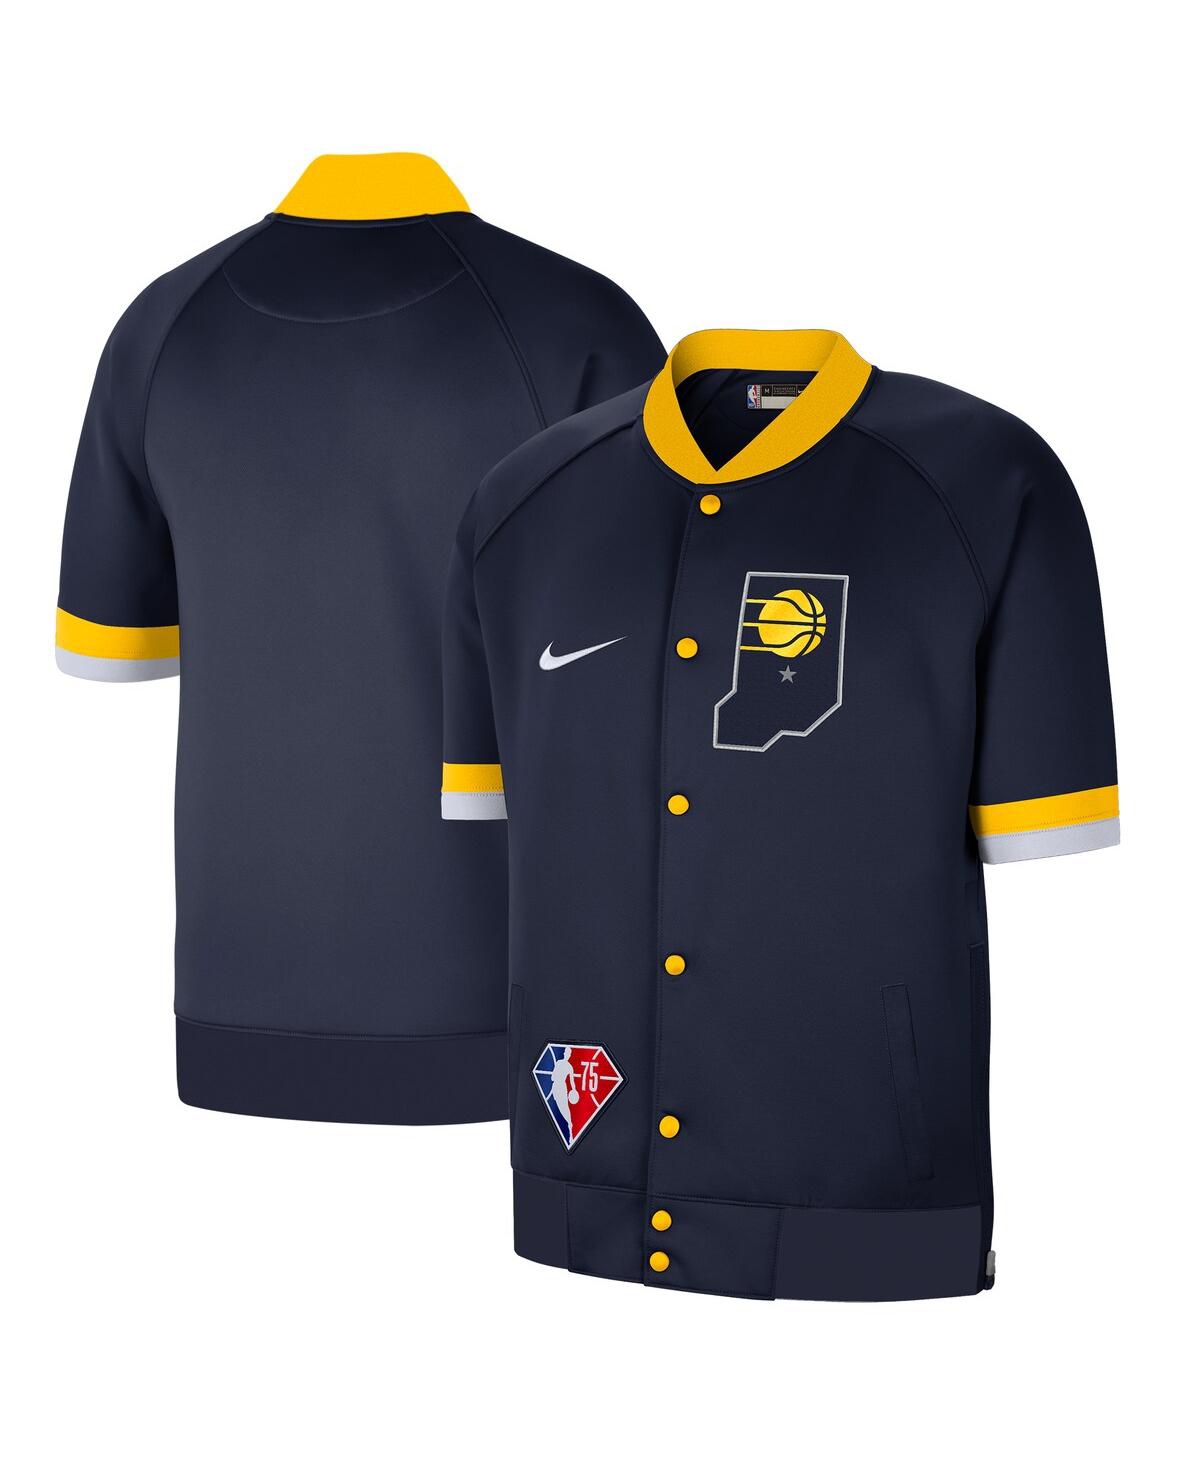 Men's Nike Navy, White Indiana Pacers 2021/22 City Edition Therma Flex Showtime Short Sleeve Full-Snap Bomber Jacket - Navy, White